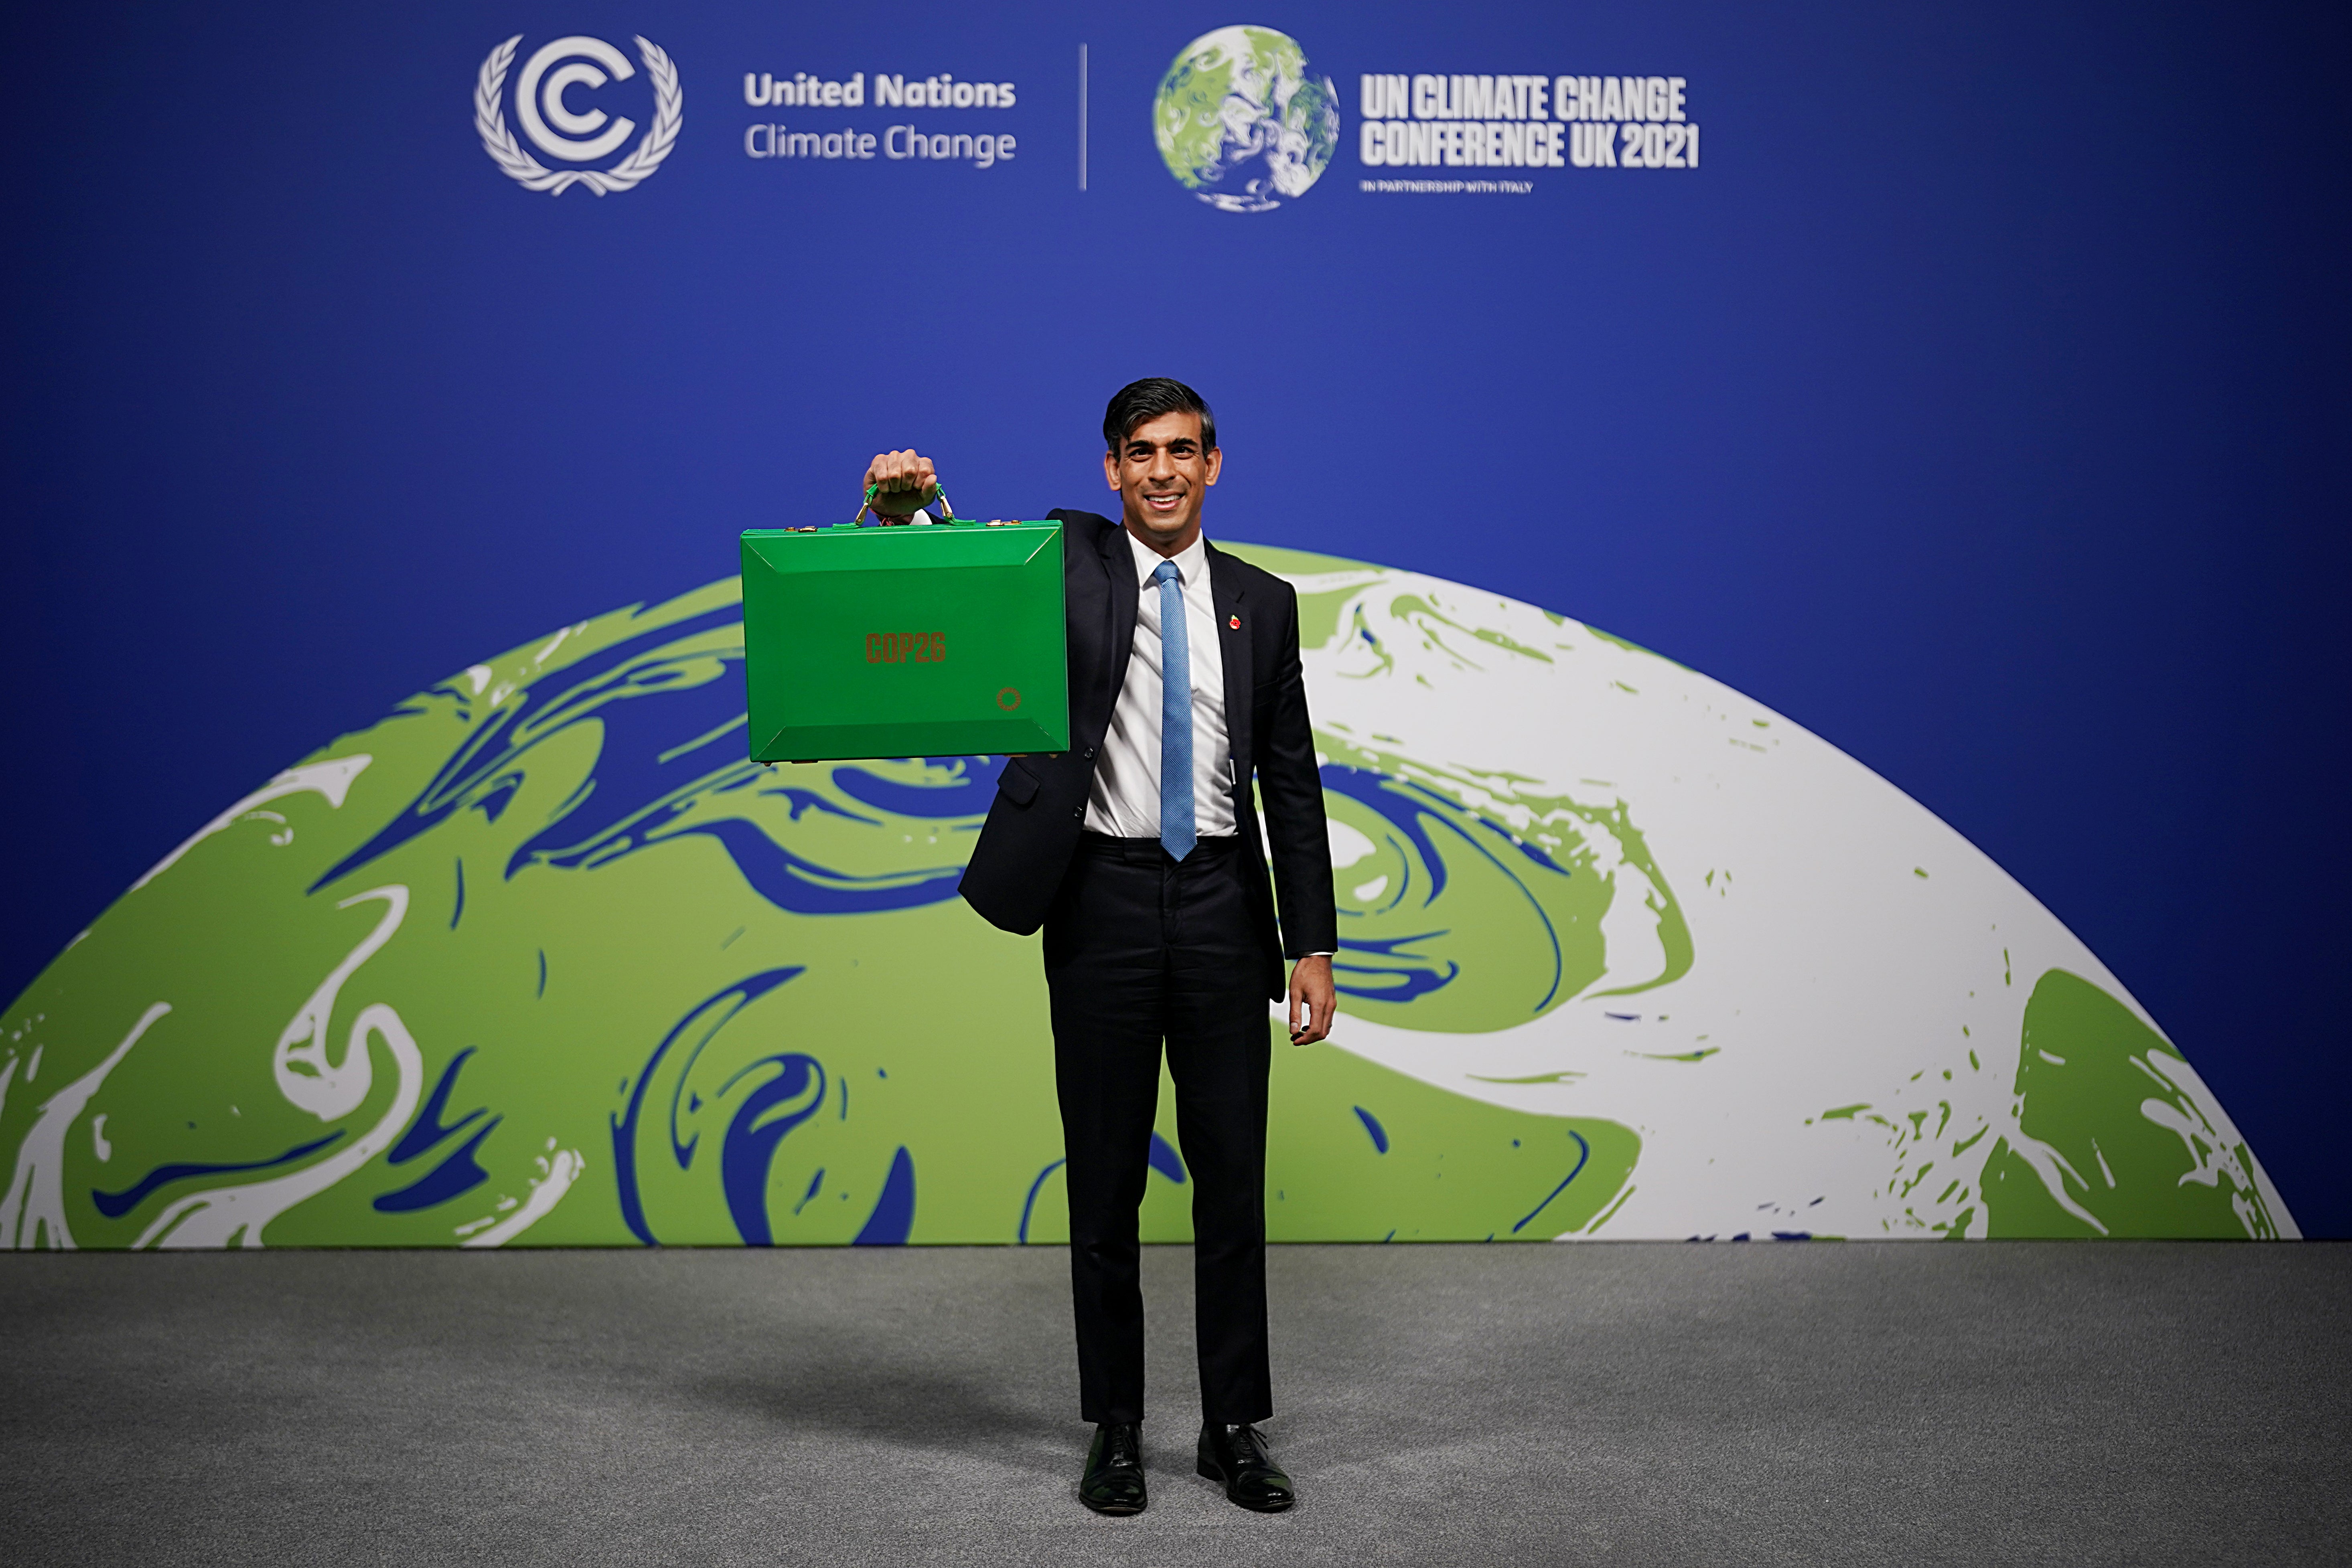 Rishi Sunak arrives at Cop 26 in Glasgow with his green budget box where he lead finance day